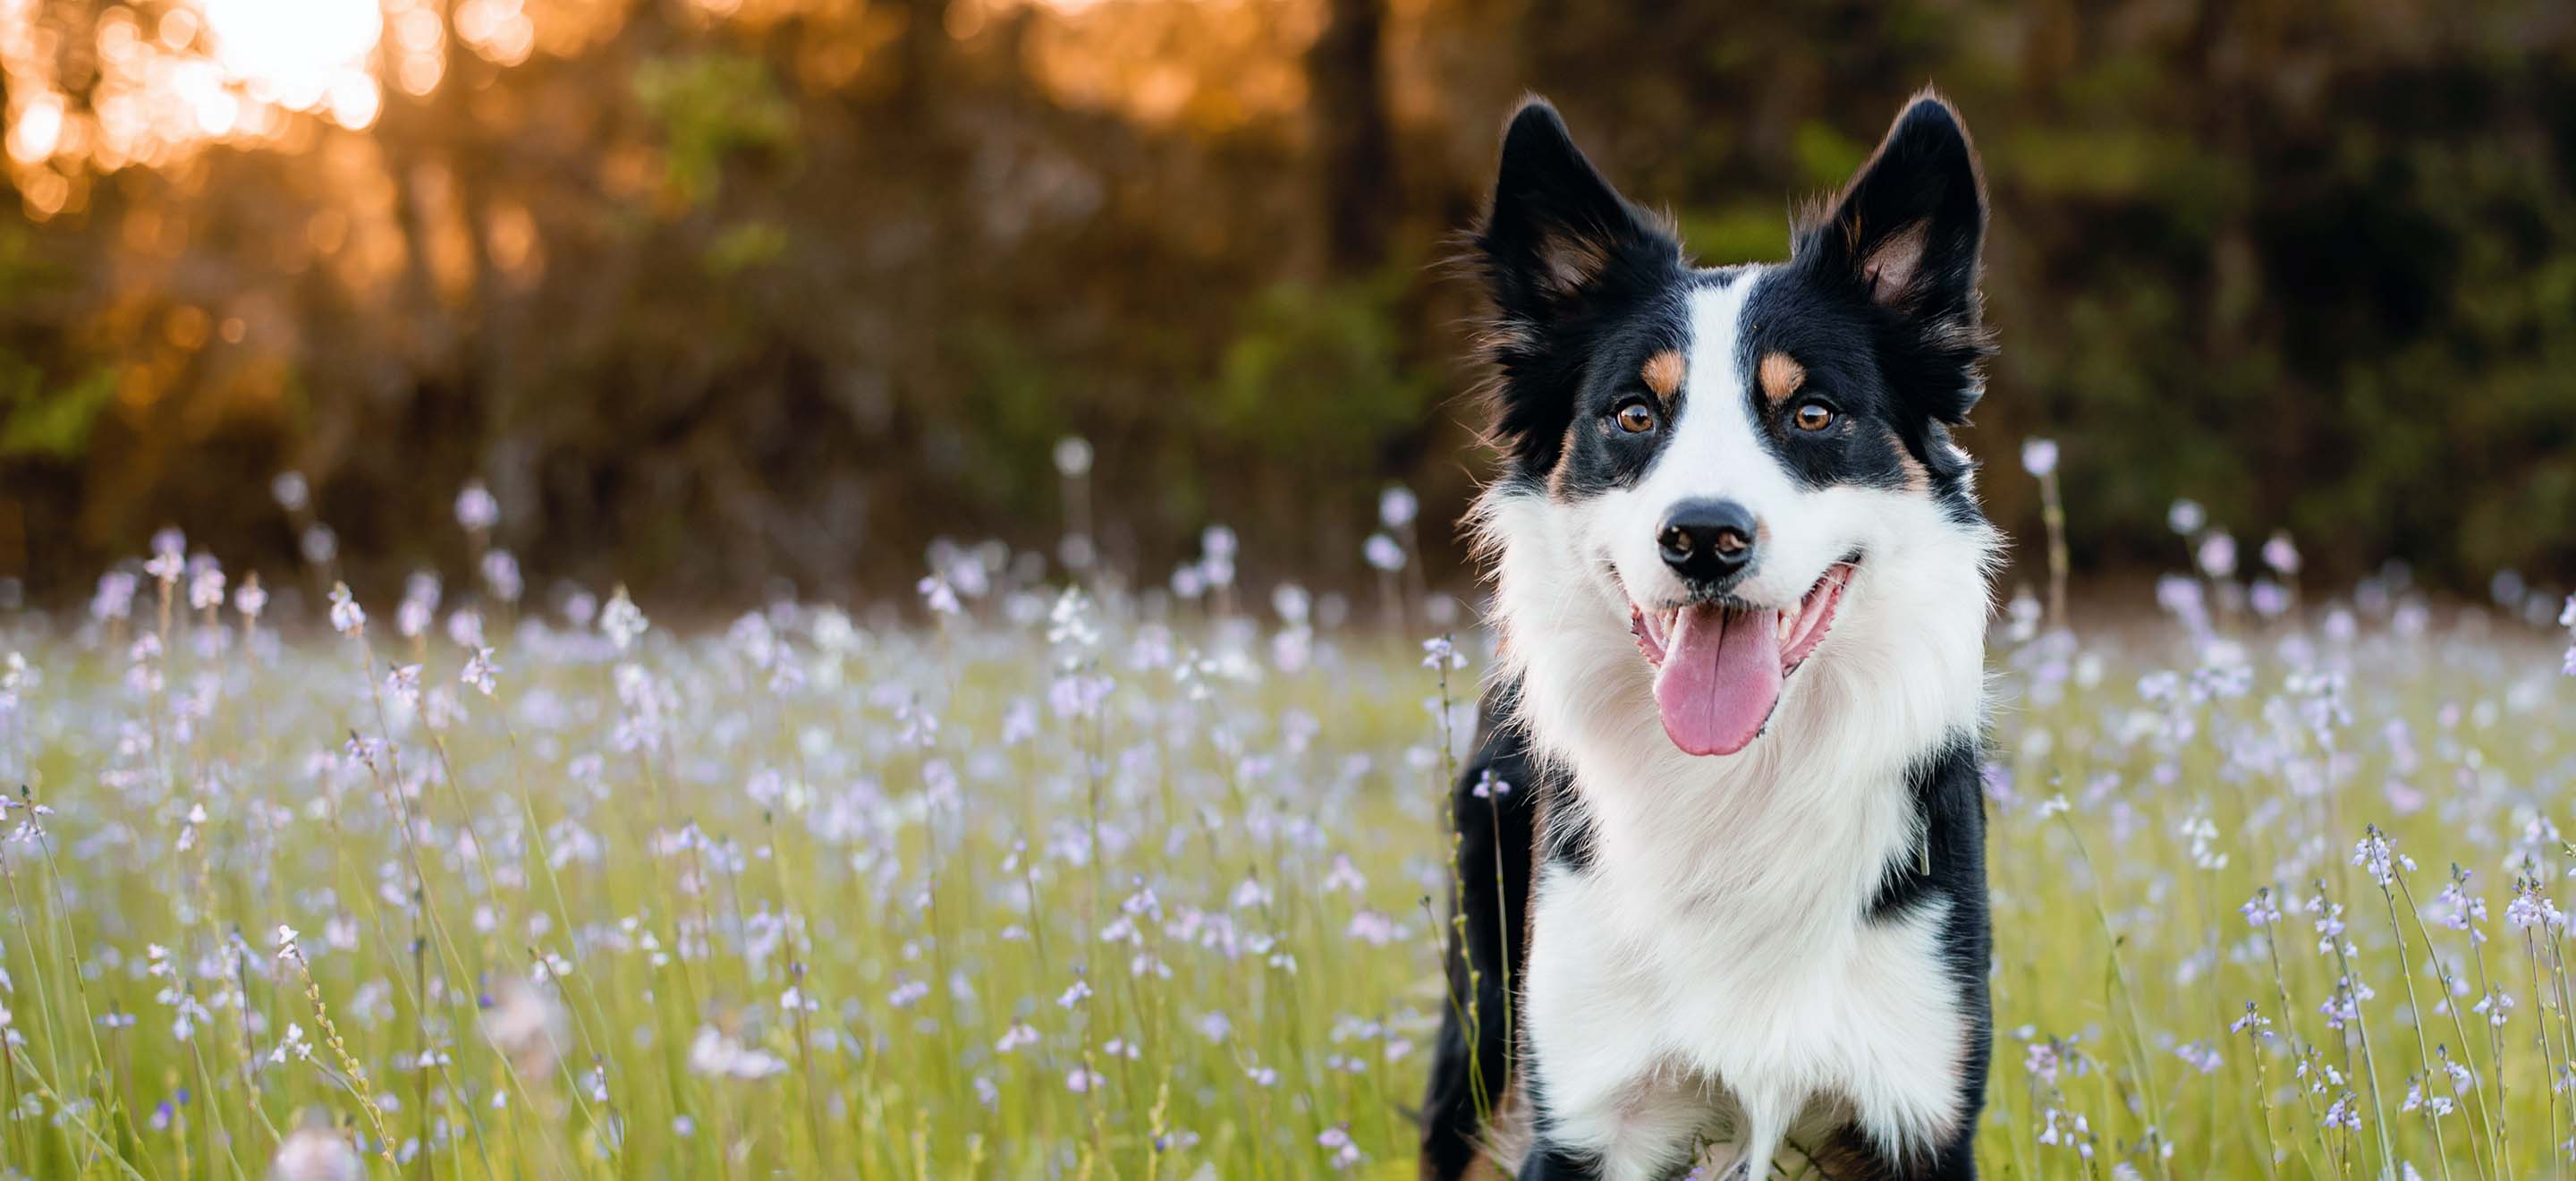 Border Collie dog standing in a field of light purple wildflowers image